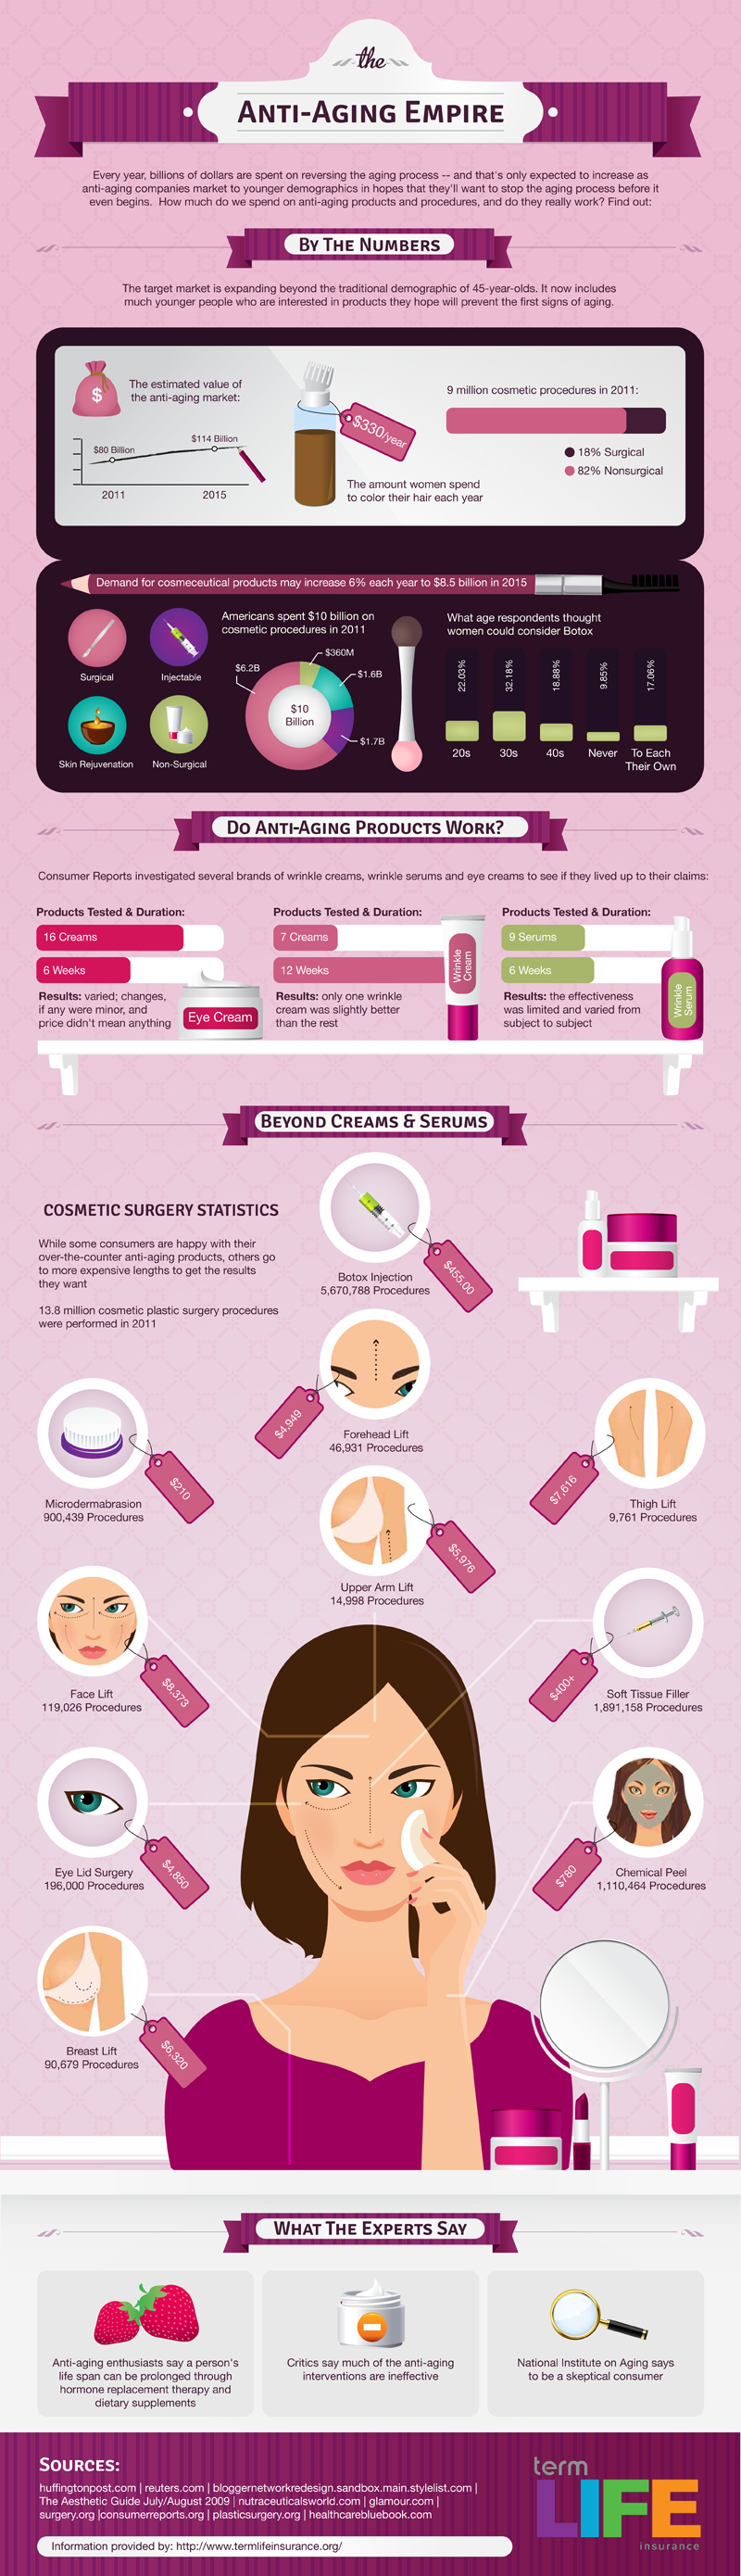 Anti Aging and Cosmetic Surgery Industry Statistics